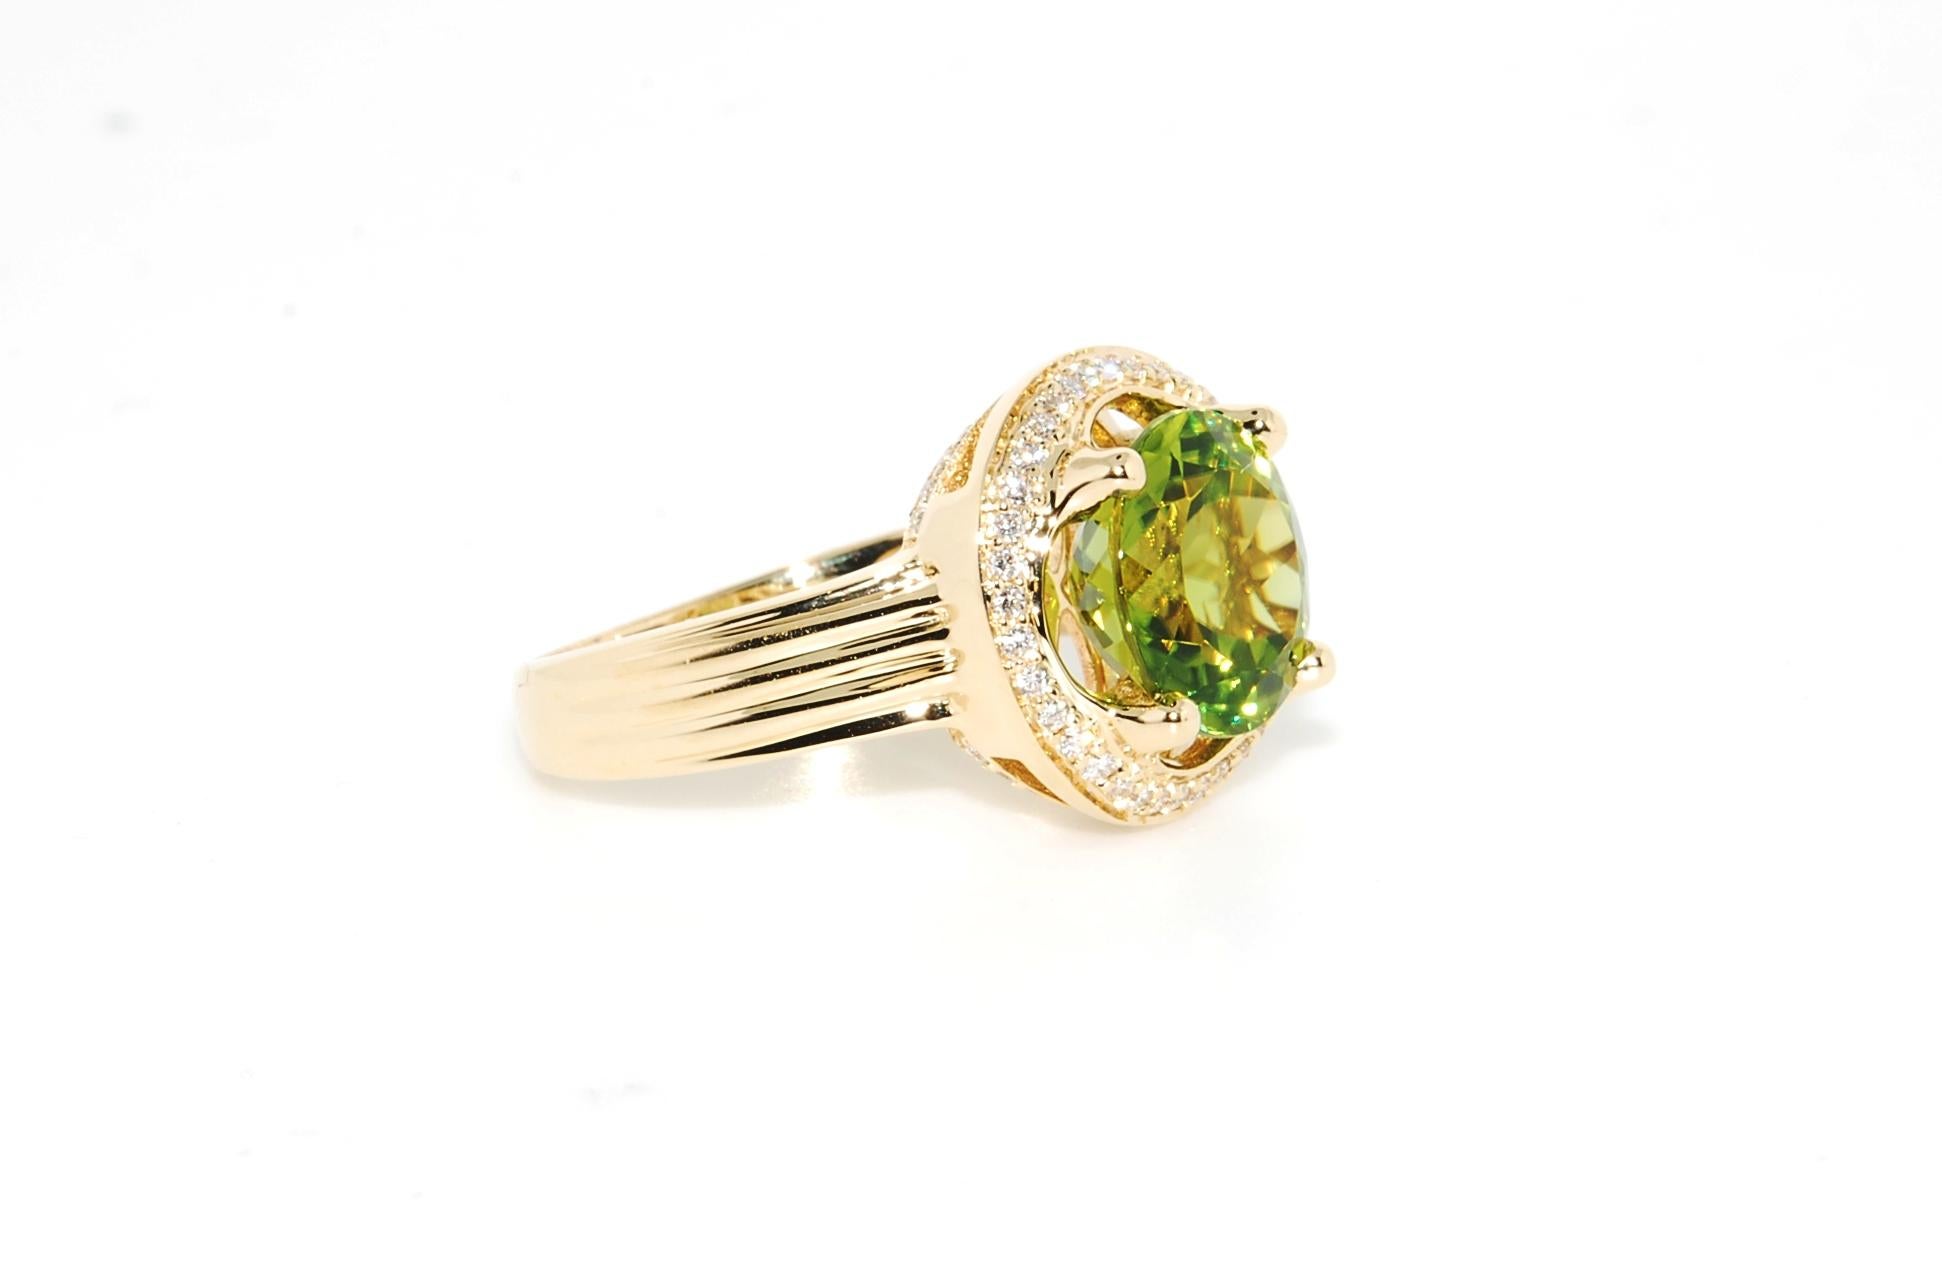 A 1.66 carat round faceted Peridot with .26 carats total weight of round full-cut diamonds set in 14 karat yellow gold. A basic,sleek, and elegant contemporary design. The Peridot is fine quality. Very nicely finished in the under gallery with a